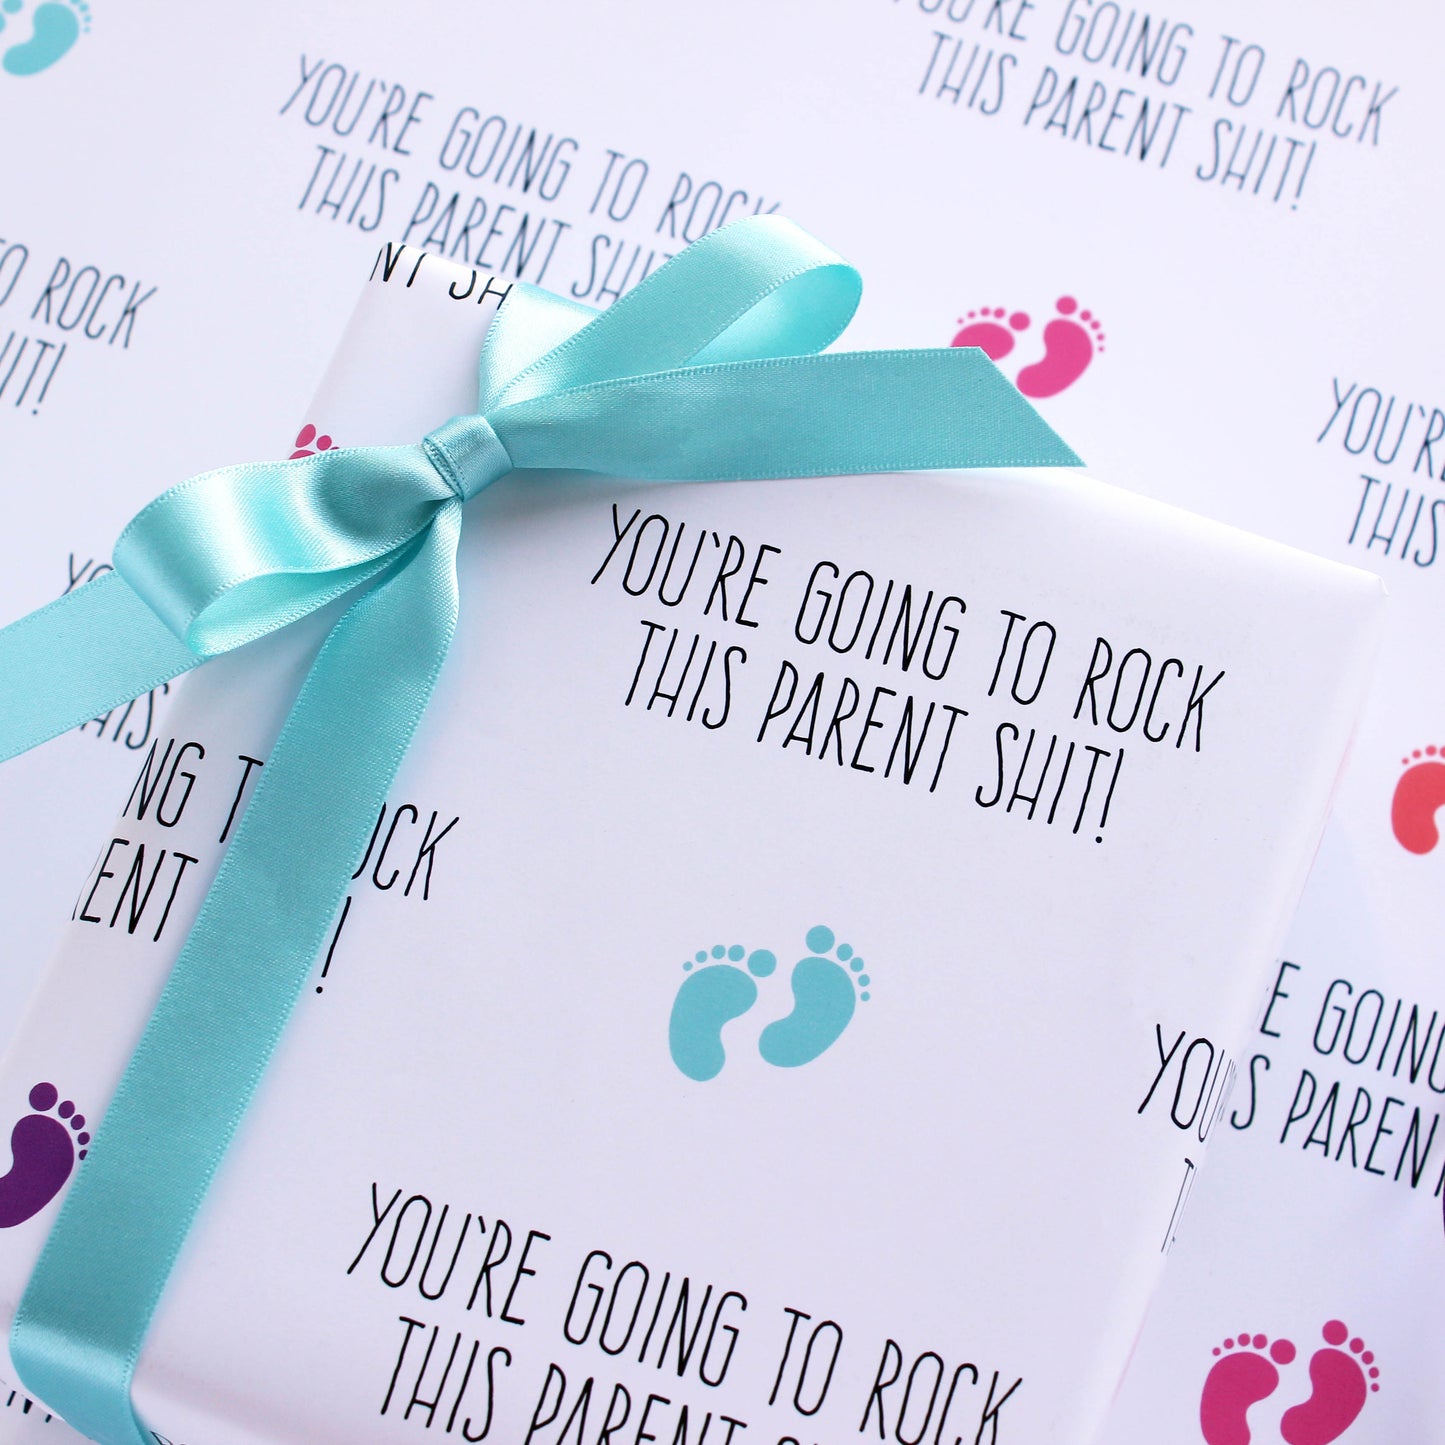 Rock this parent shit new baby wrapping paper + gift tag